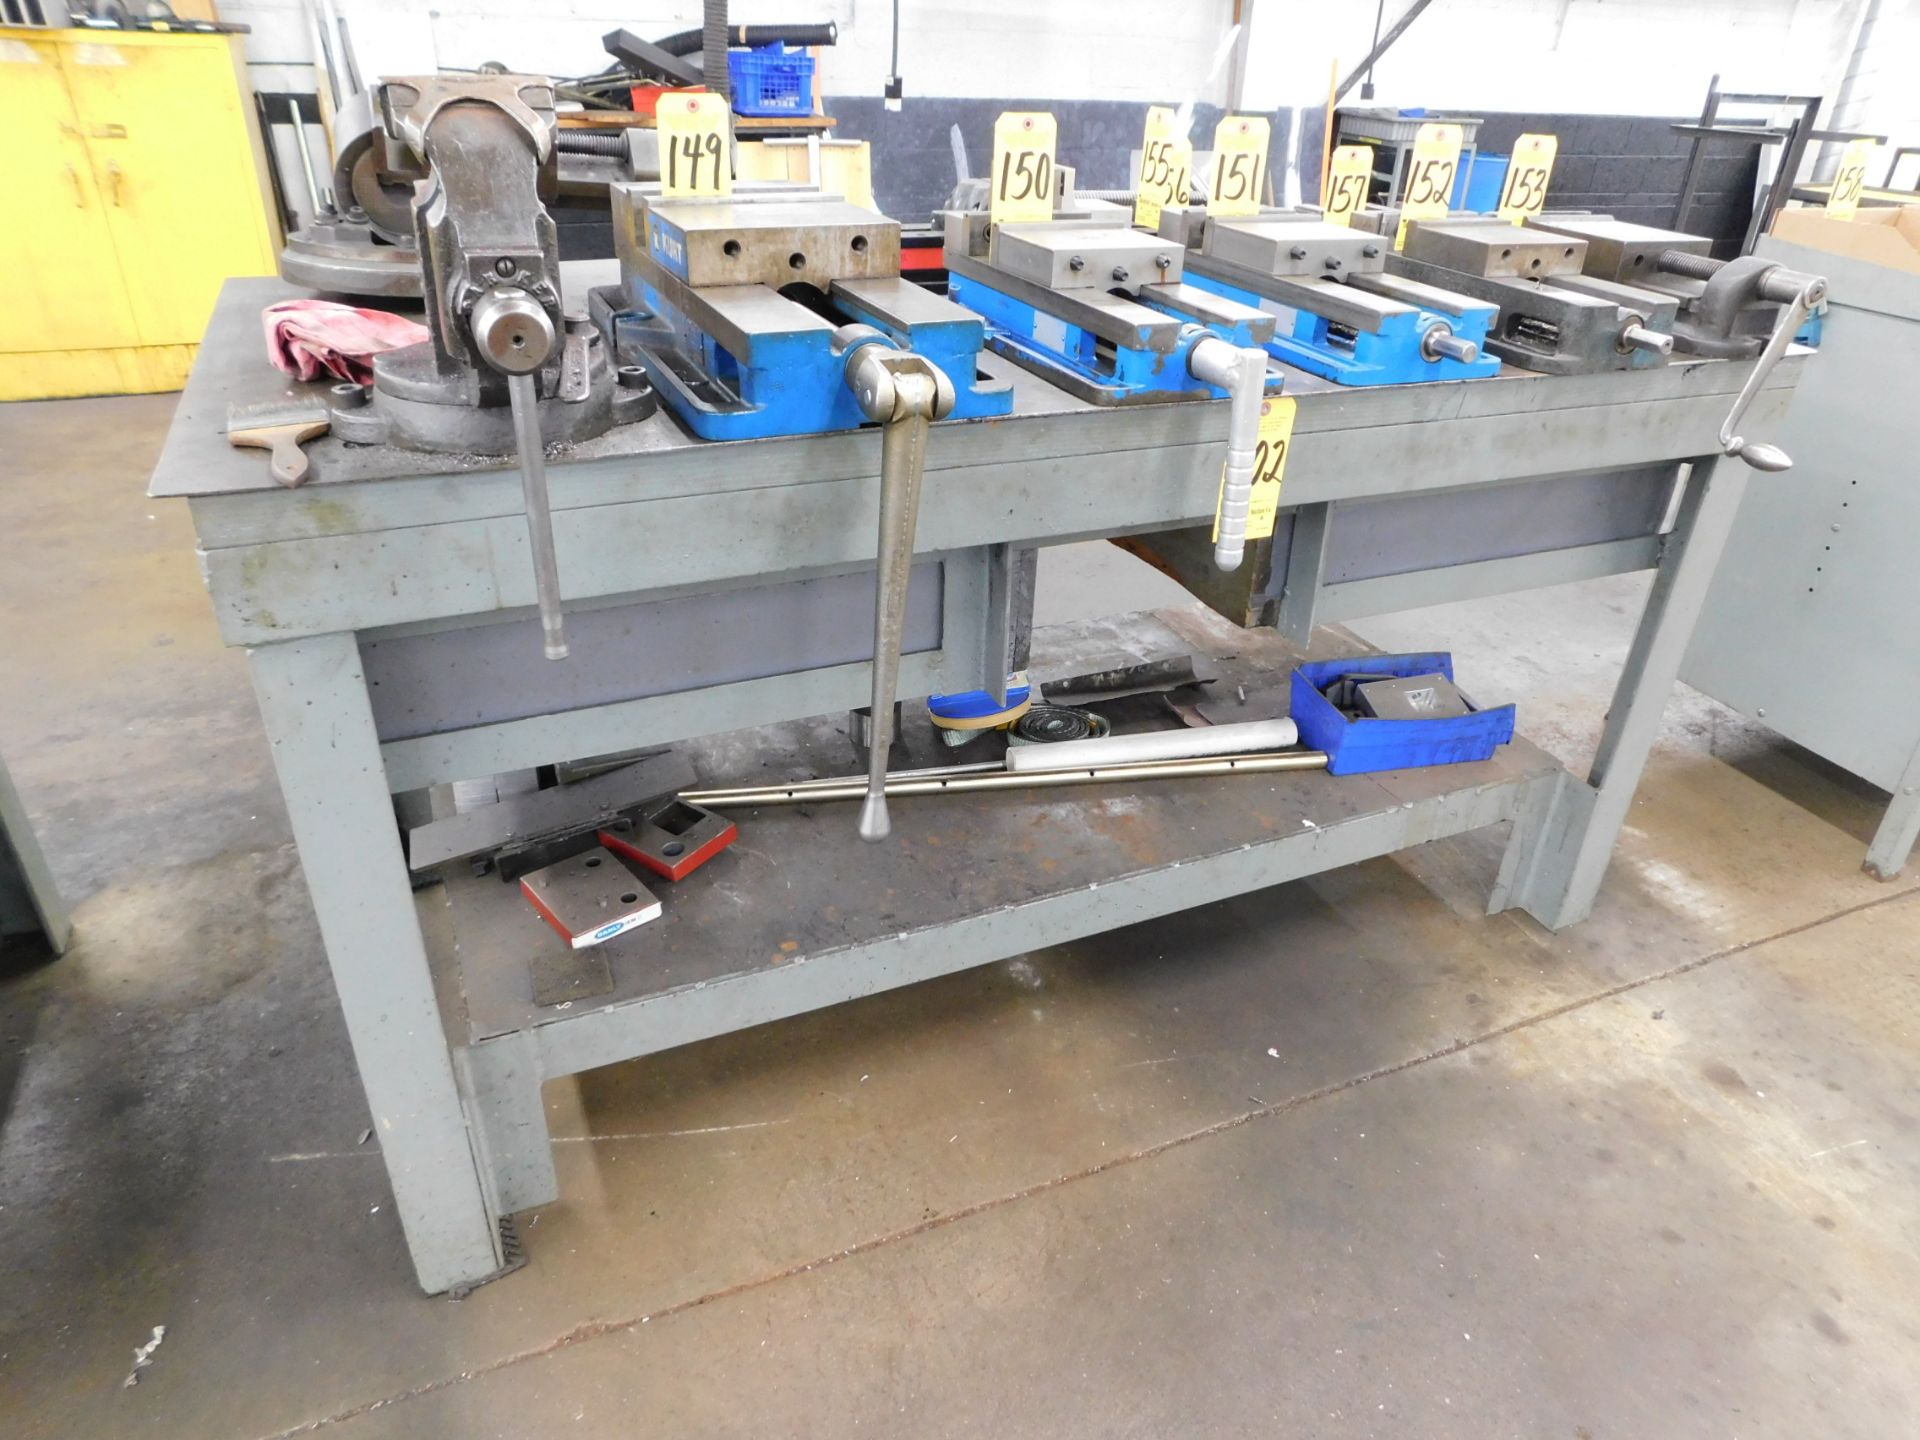 Steel Shop Table, 35" X 70" X 35" High, with Bench Vise